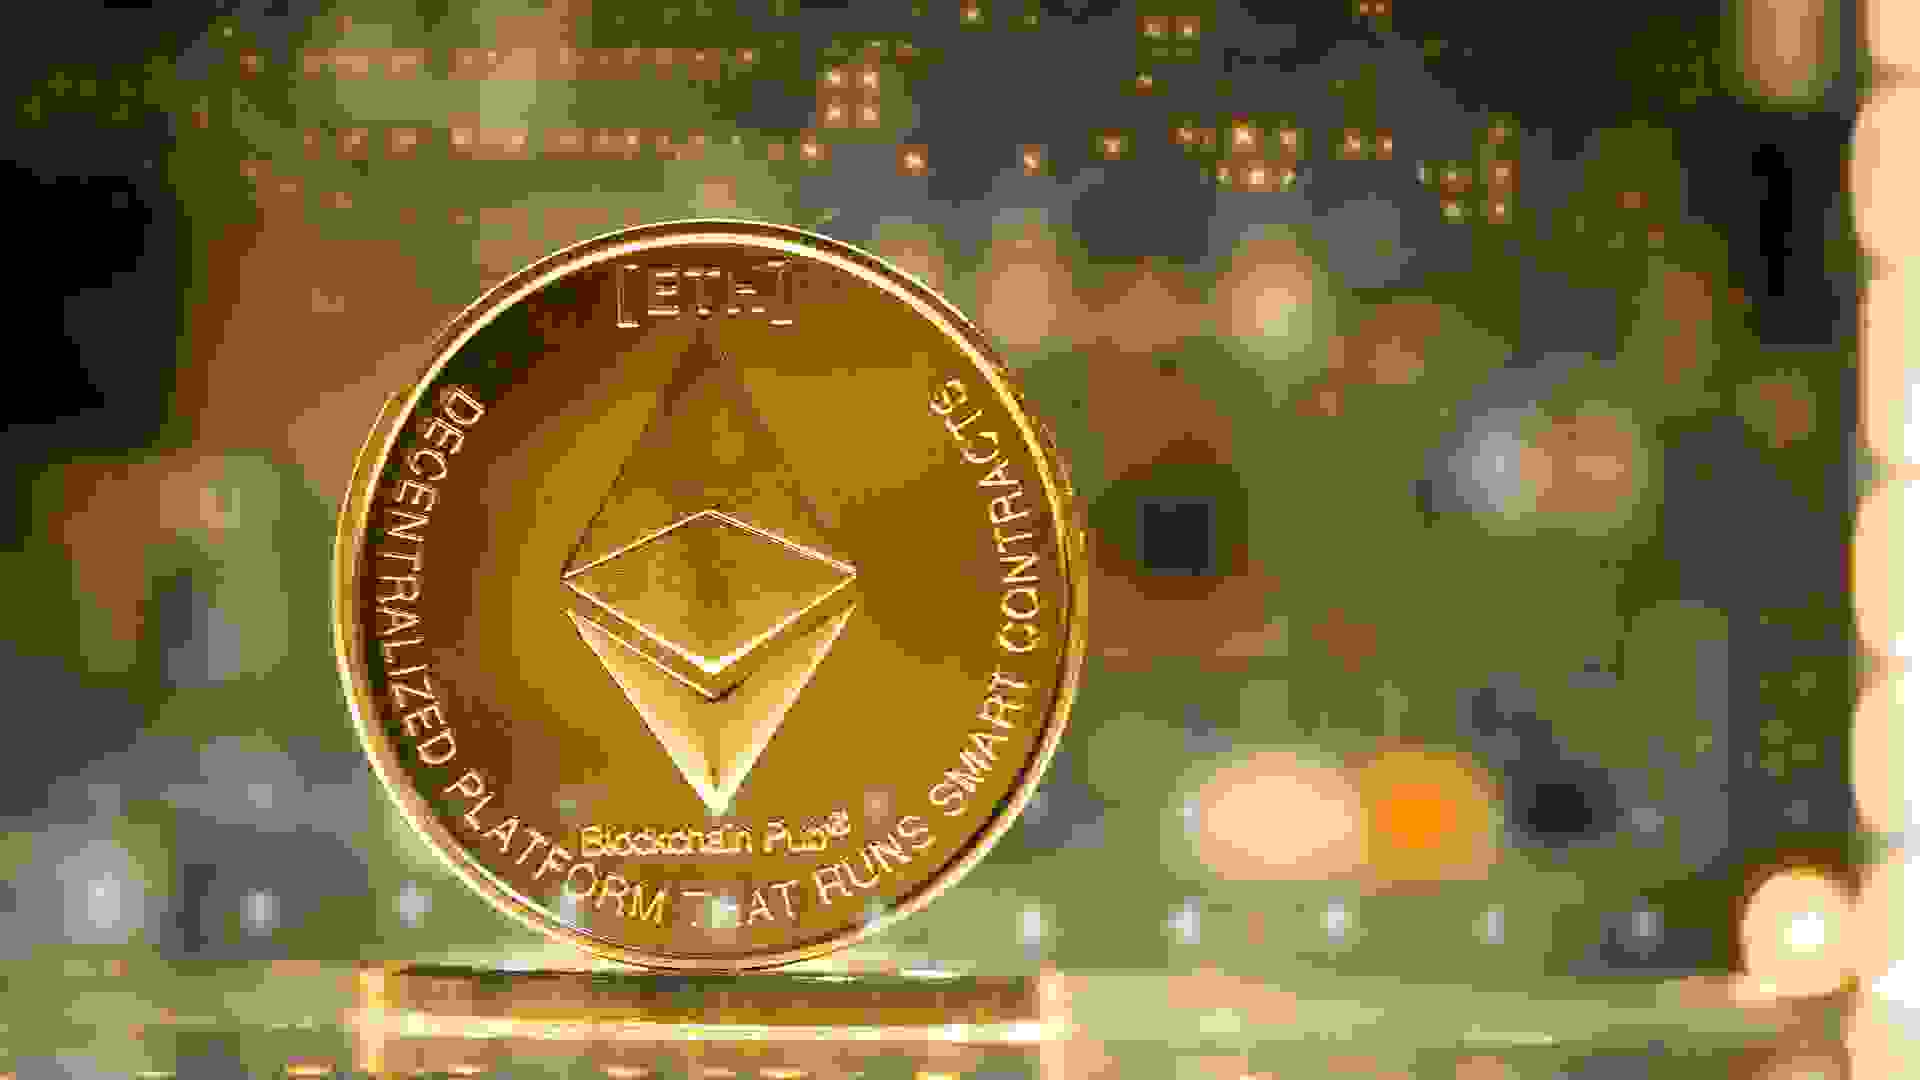 Curitiba, PR, Brazil - June 16, 2021: Ethereum coin on a circuit board setup with LEDs representing the high technology involved in the cryptocurrency network.